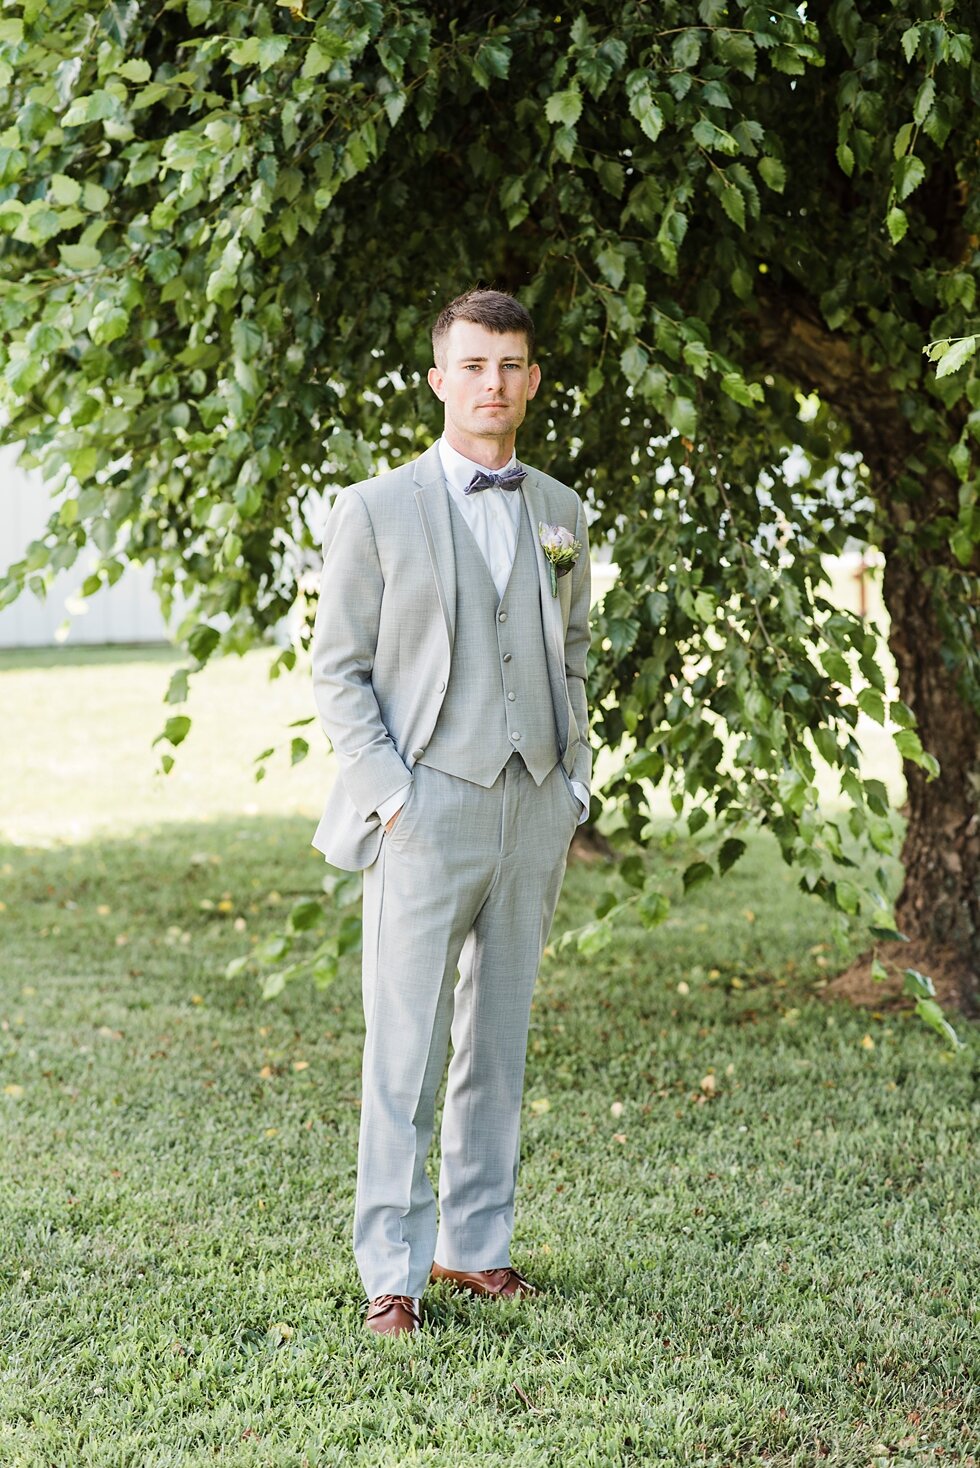  Wedding photography focusing on the groom in his grey suit with his hands in his pockets. wedding ceremony details stunning photography married midwest louisville kentucky #weddingphoto #love #justmarried #midwestphotographer #kywedding #louisville 